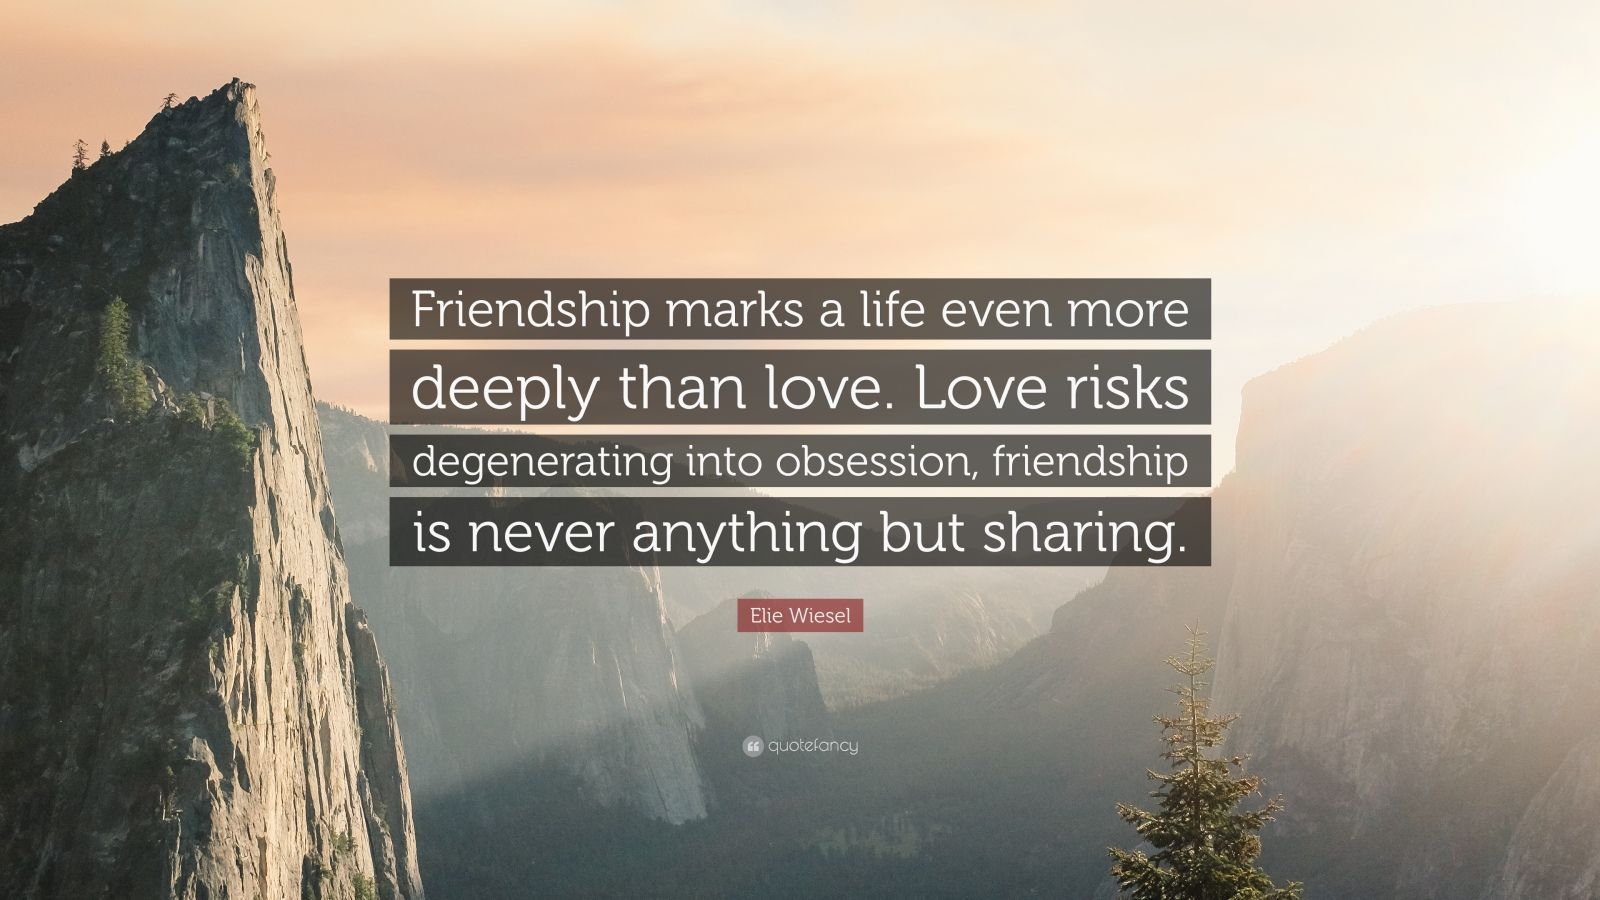 Relationship Quotes “Friendship marks a life even more deeply than love Love risks